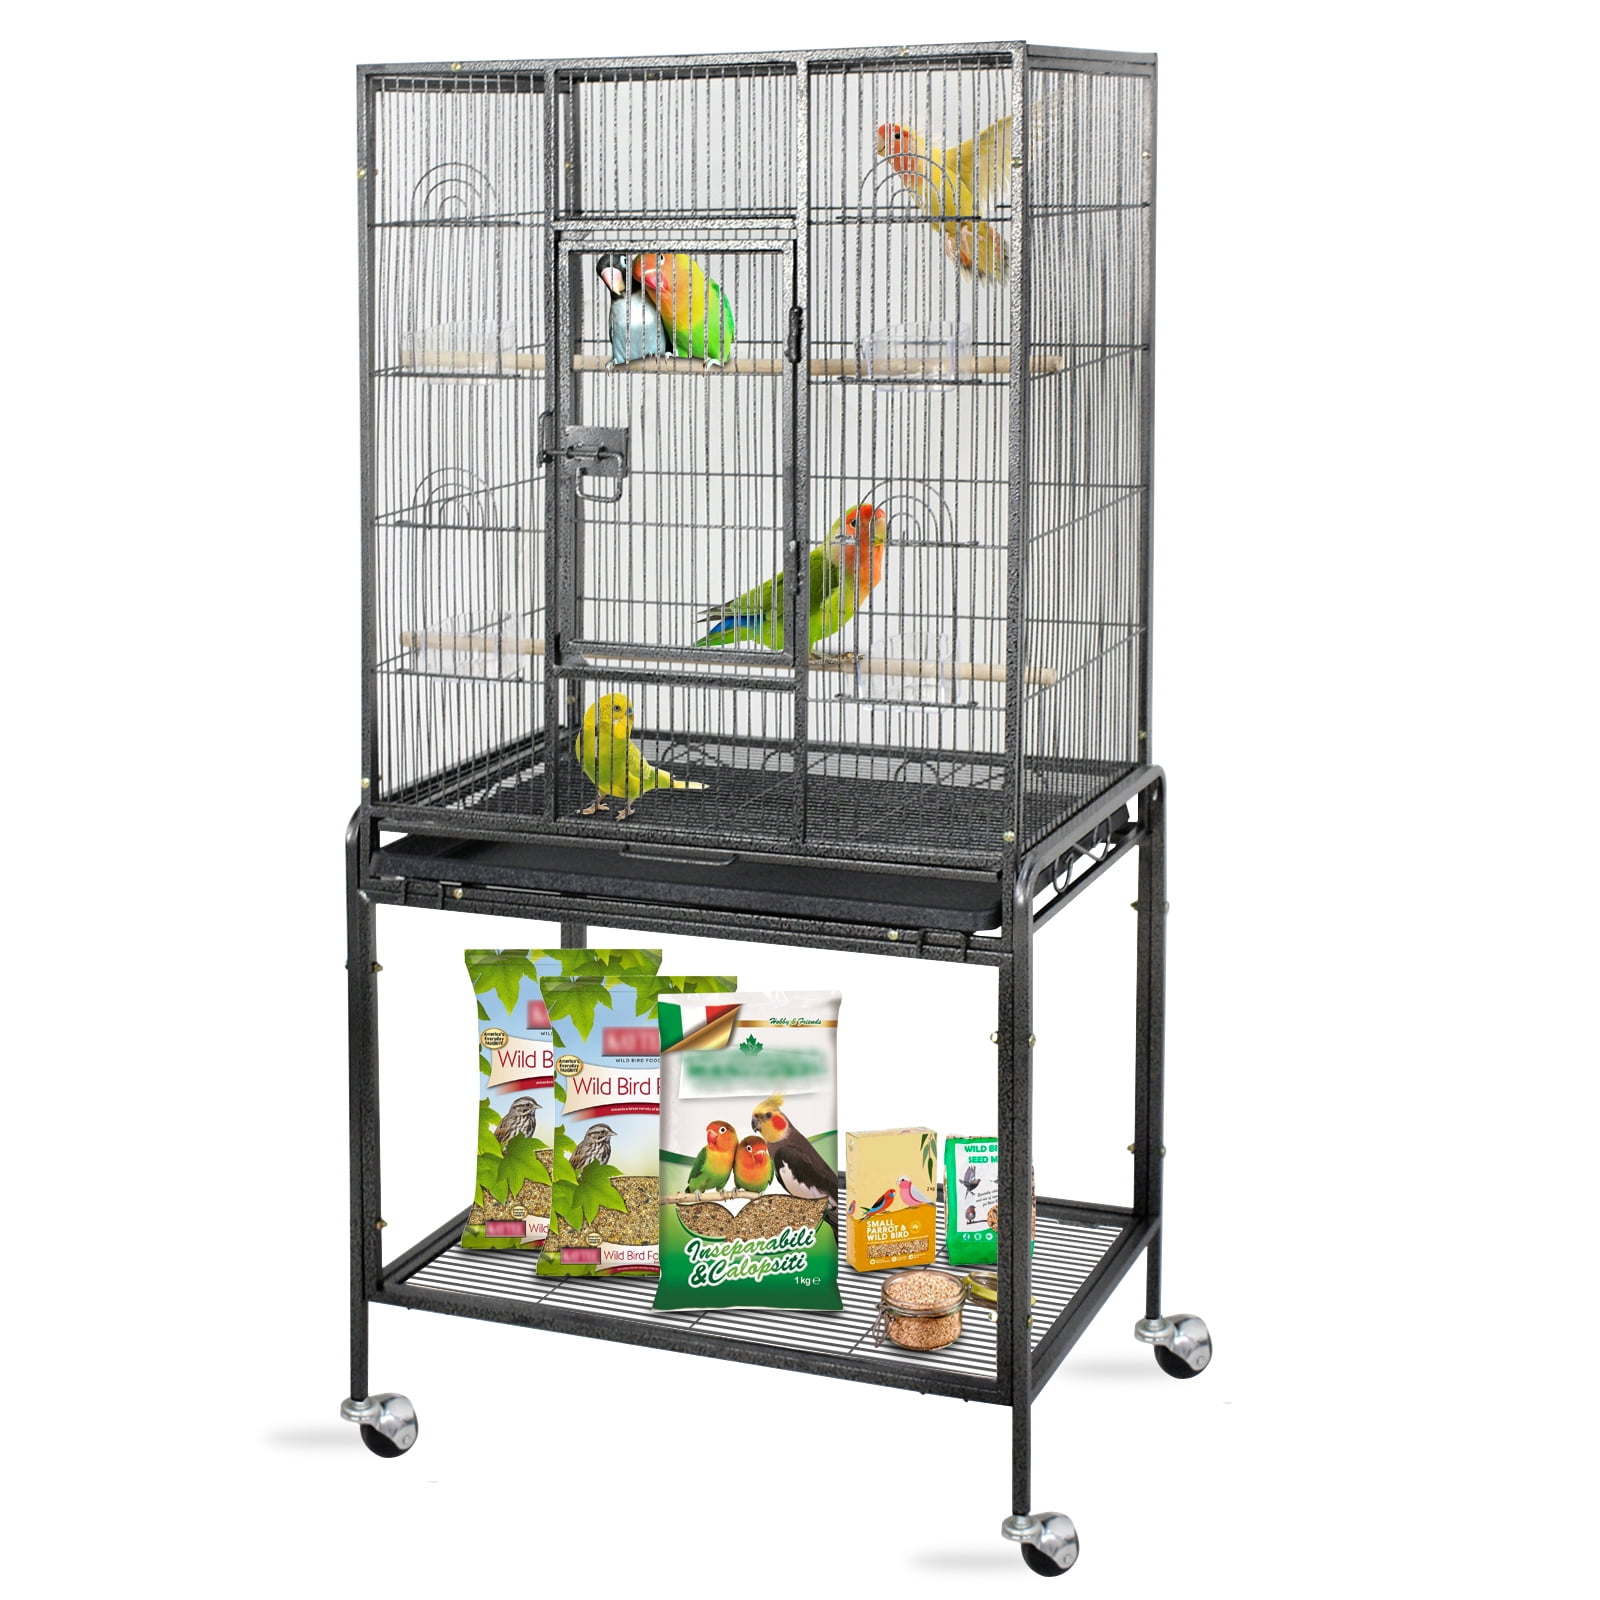 conure bird cages for sale